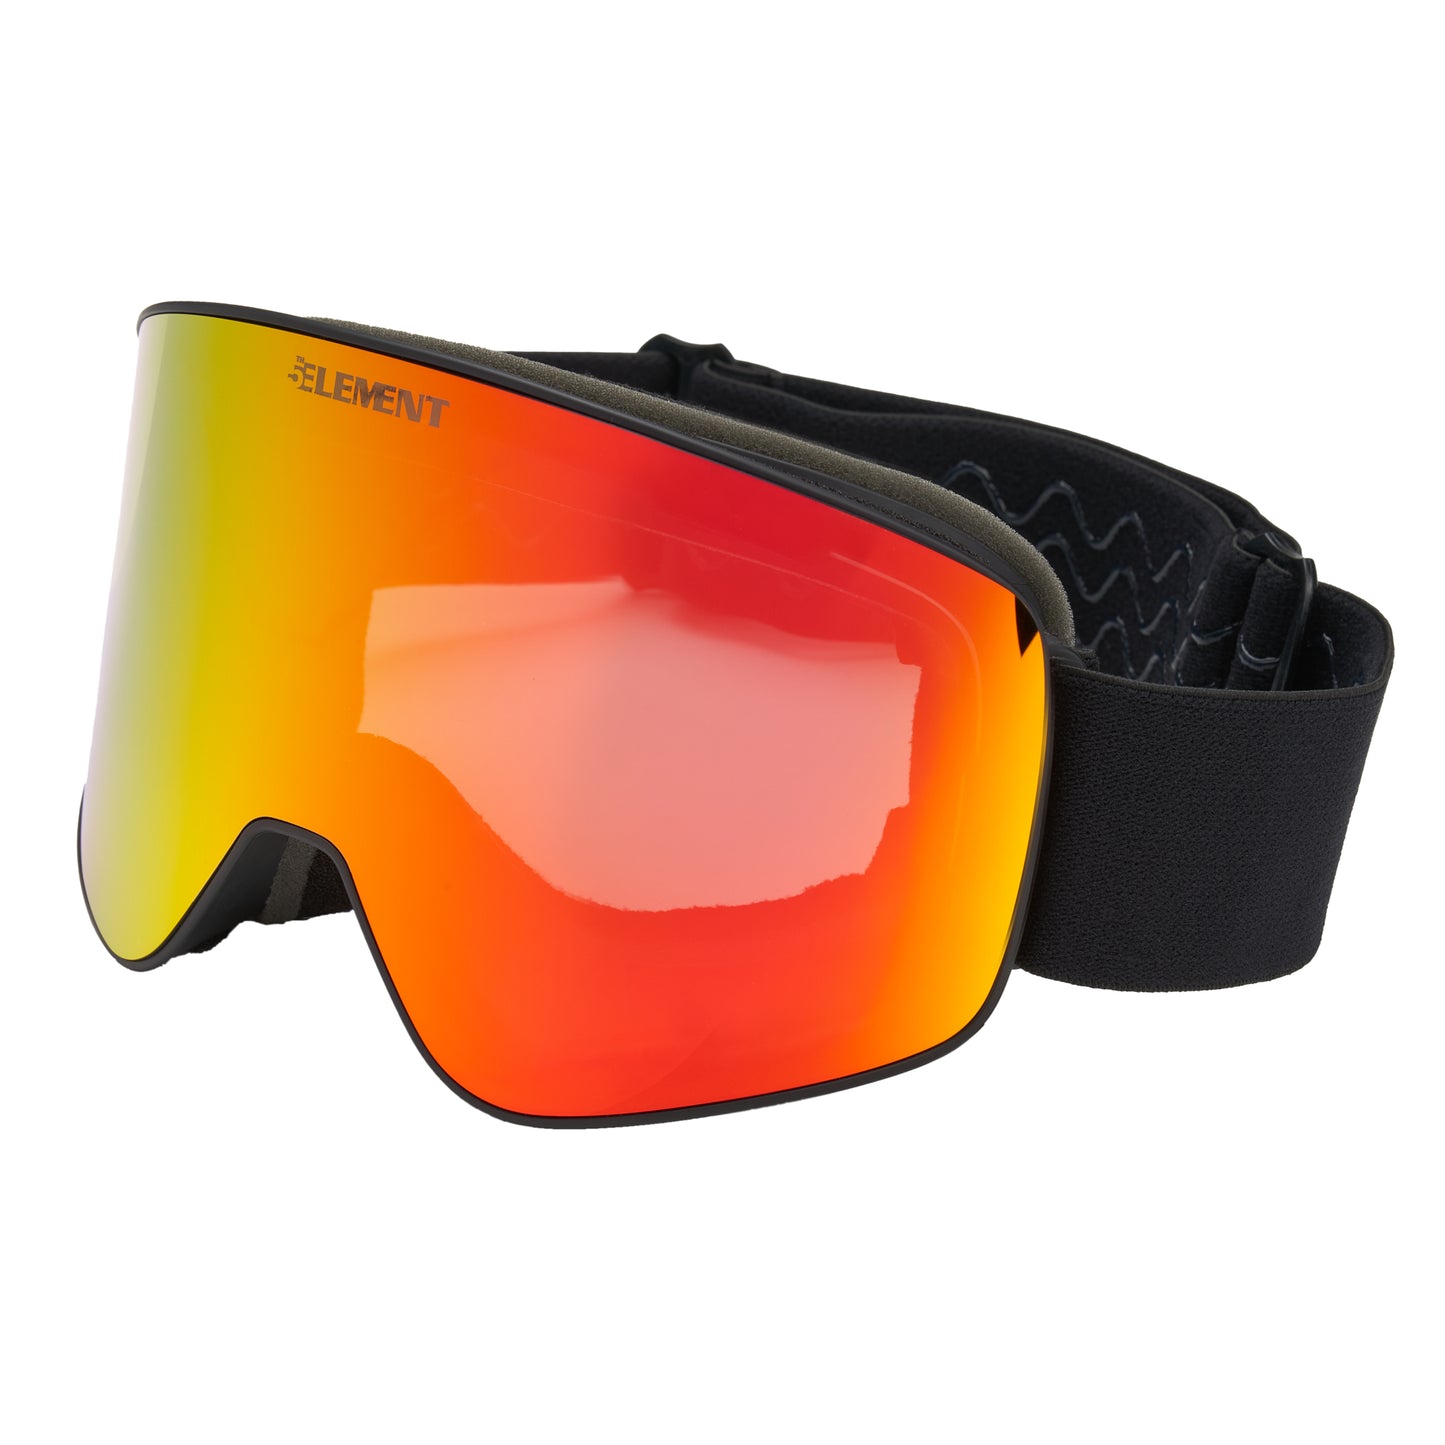 5th Element Stealth Flat Mag Goggle